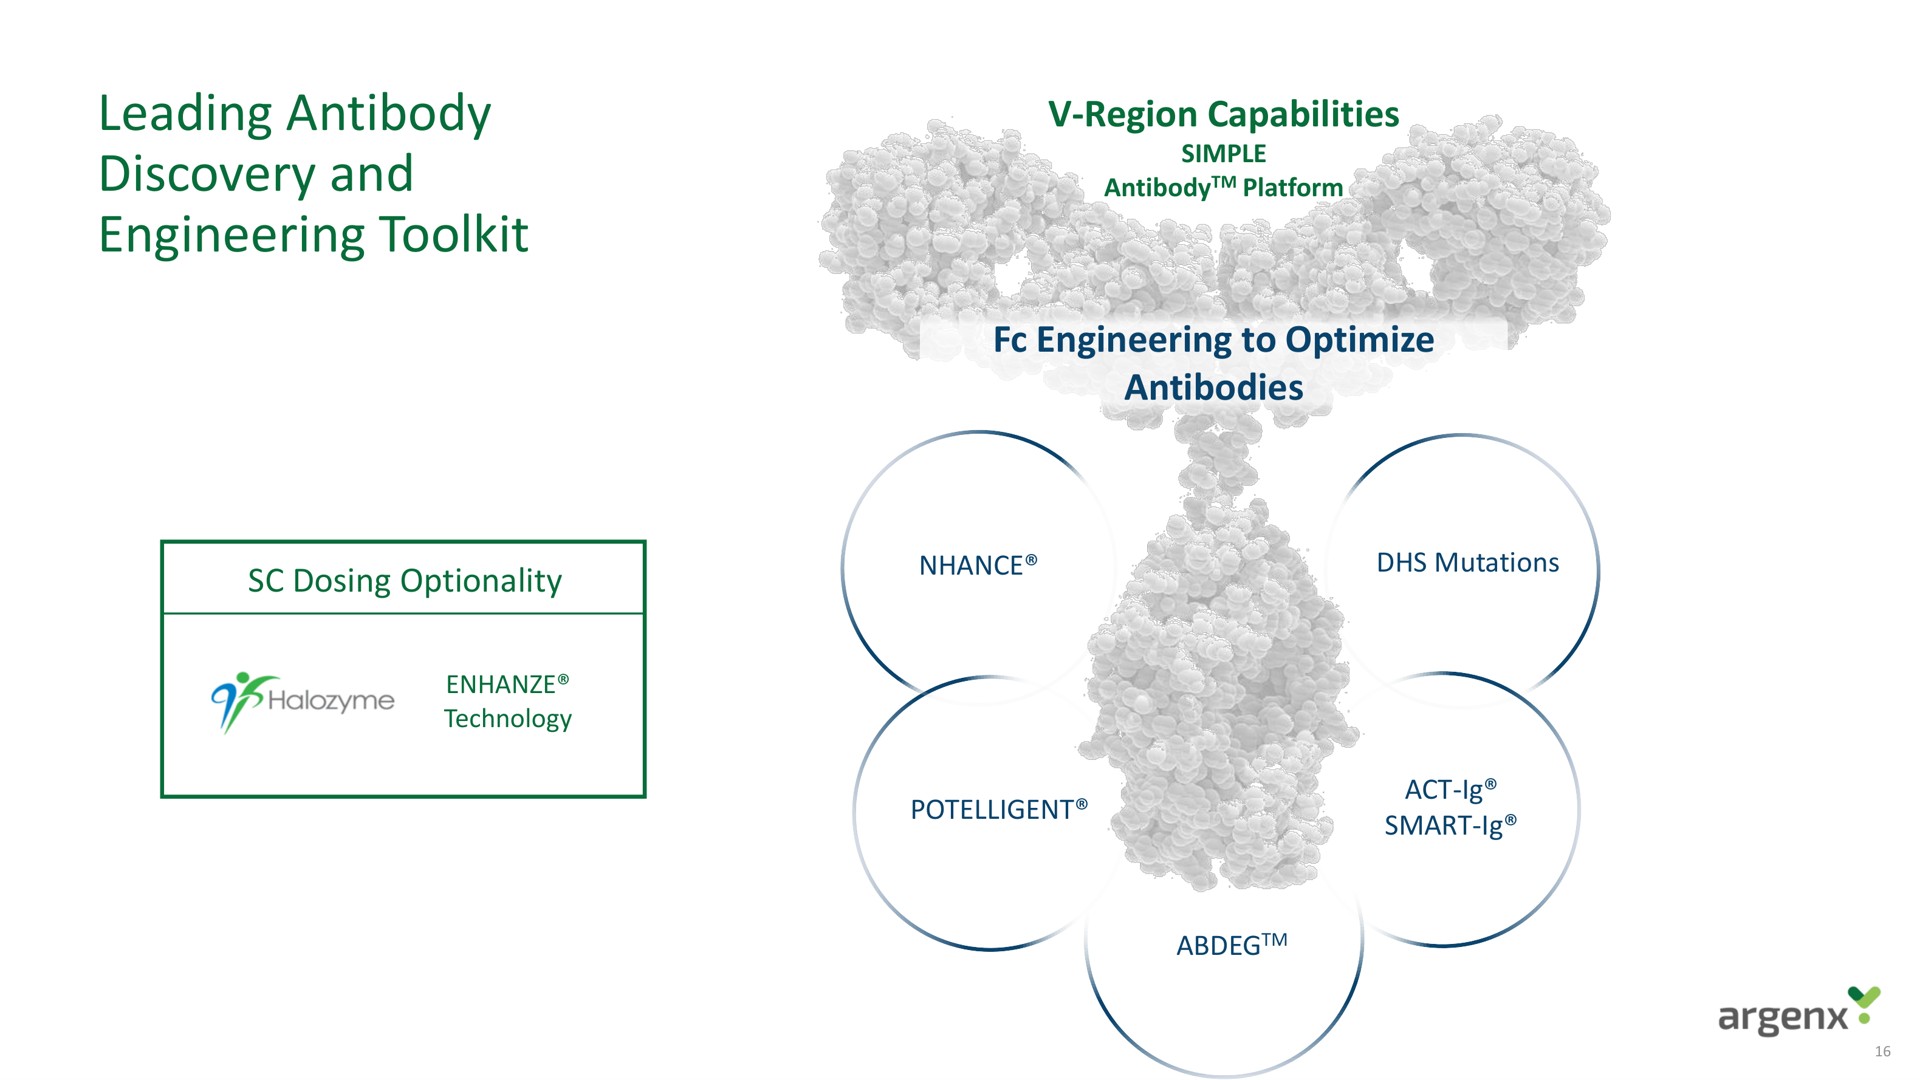 leading antibody discovery and engineering | argenx SE